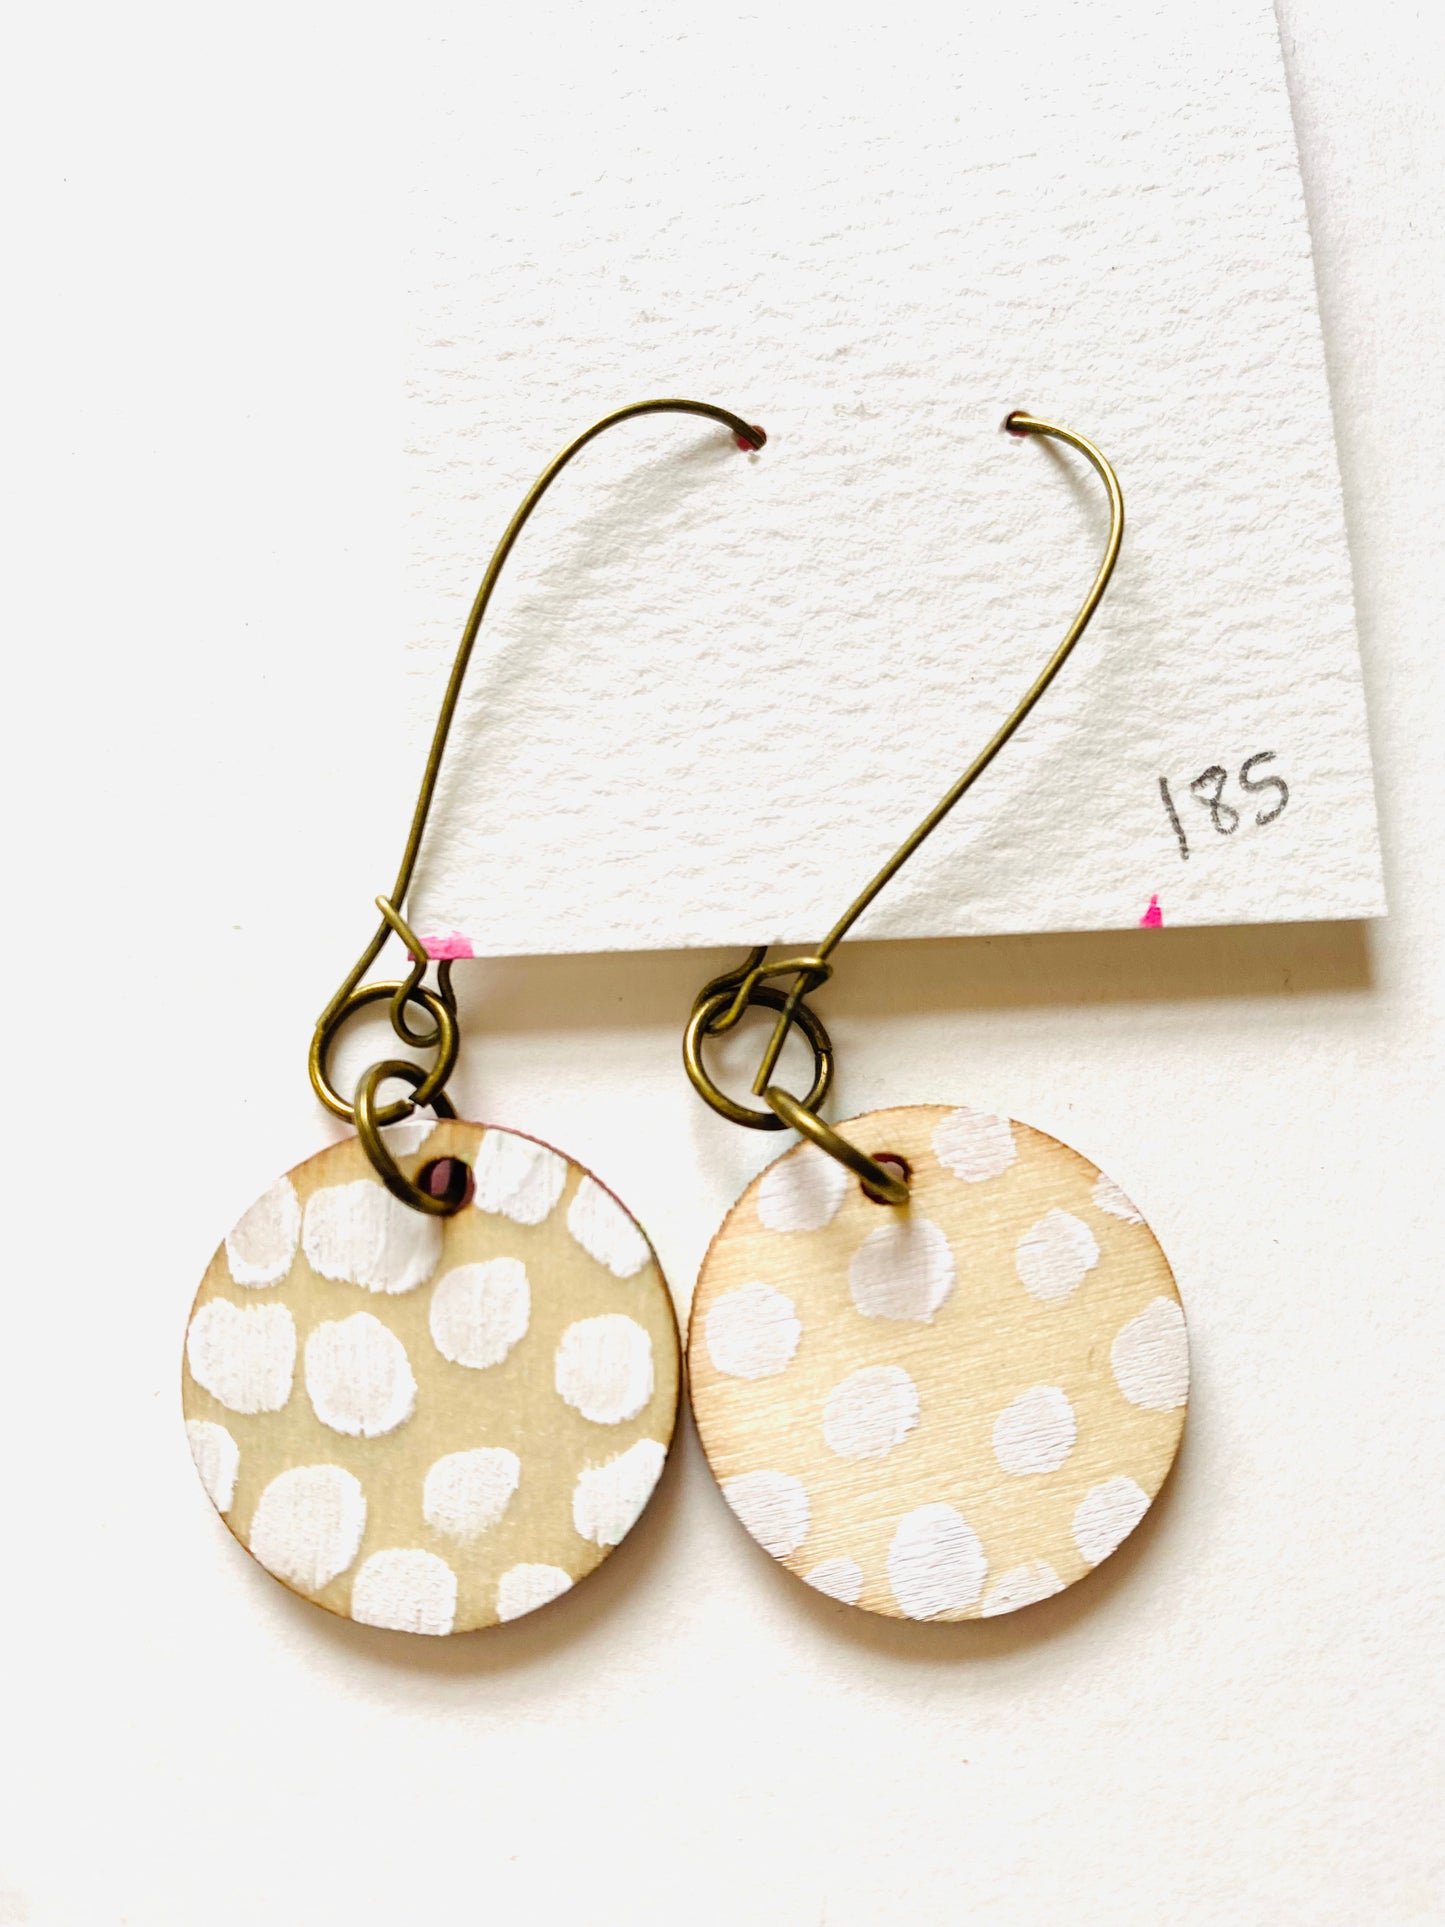 Colorful, Hand Painted Earrings 185